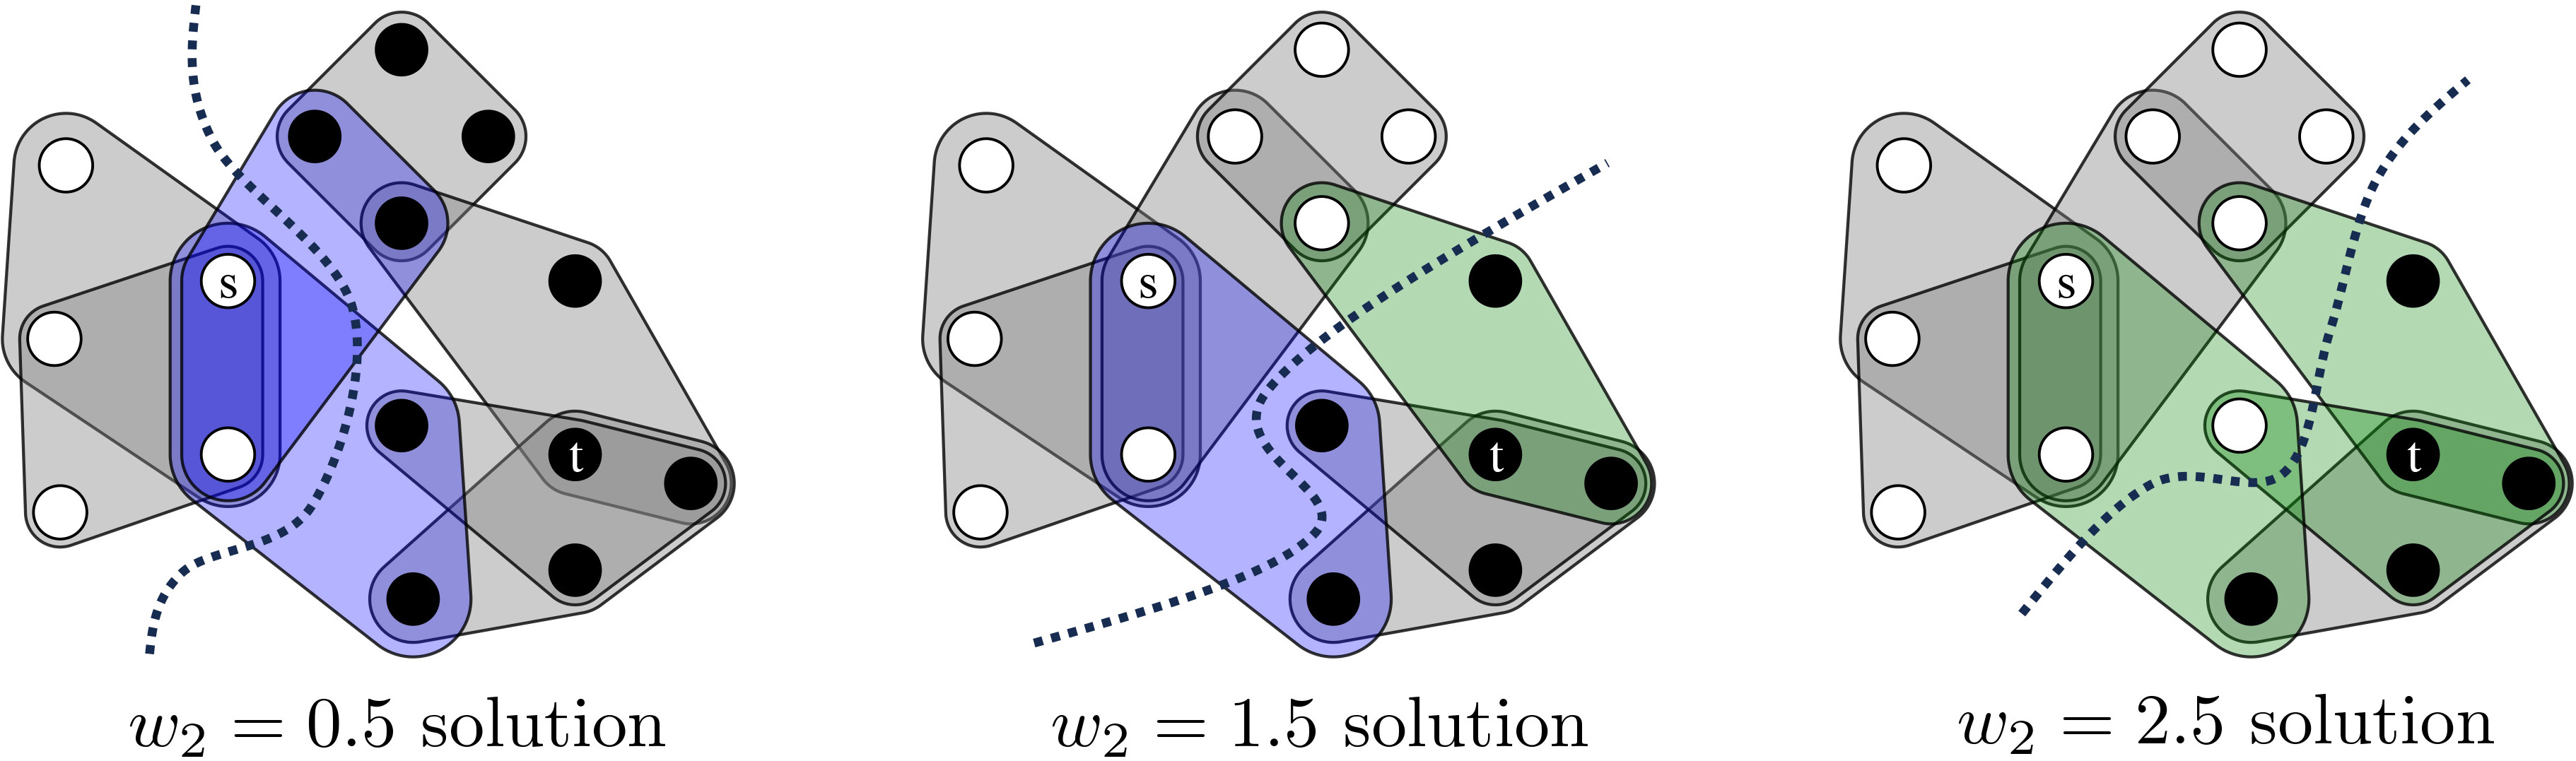 &lt;strong&gt;Figure 1.&lt;/strong&gt; The cardinality-based \(s\)-\(t\) cut problem aims to separate special nodes \(s\) and \(t\) into two different clusters (shown here with differently colored nodes) while minimizing a generalized hypergraph cut penalty. A hyperedge is cut if it spans both clusters. A four-node hyperedge has a cut penalty of \(w_1 = 1\) if exactly one of its nodes is contained in one of the clusters (green hyperedges). It receives a cut penalty of \(w_2\) if it has two nodes in each cluster (blue hyperedges). The optimal solution depends on the choice of \(w_2\). Figure courtesy of the author.